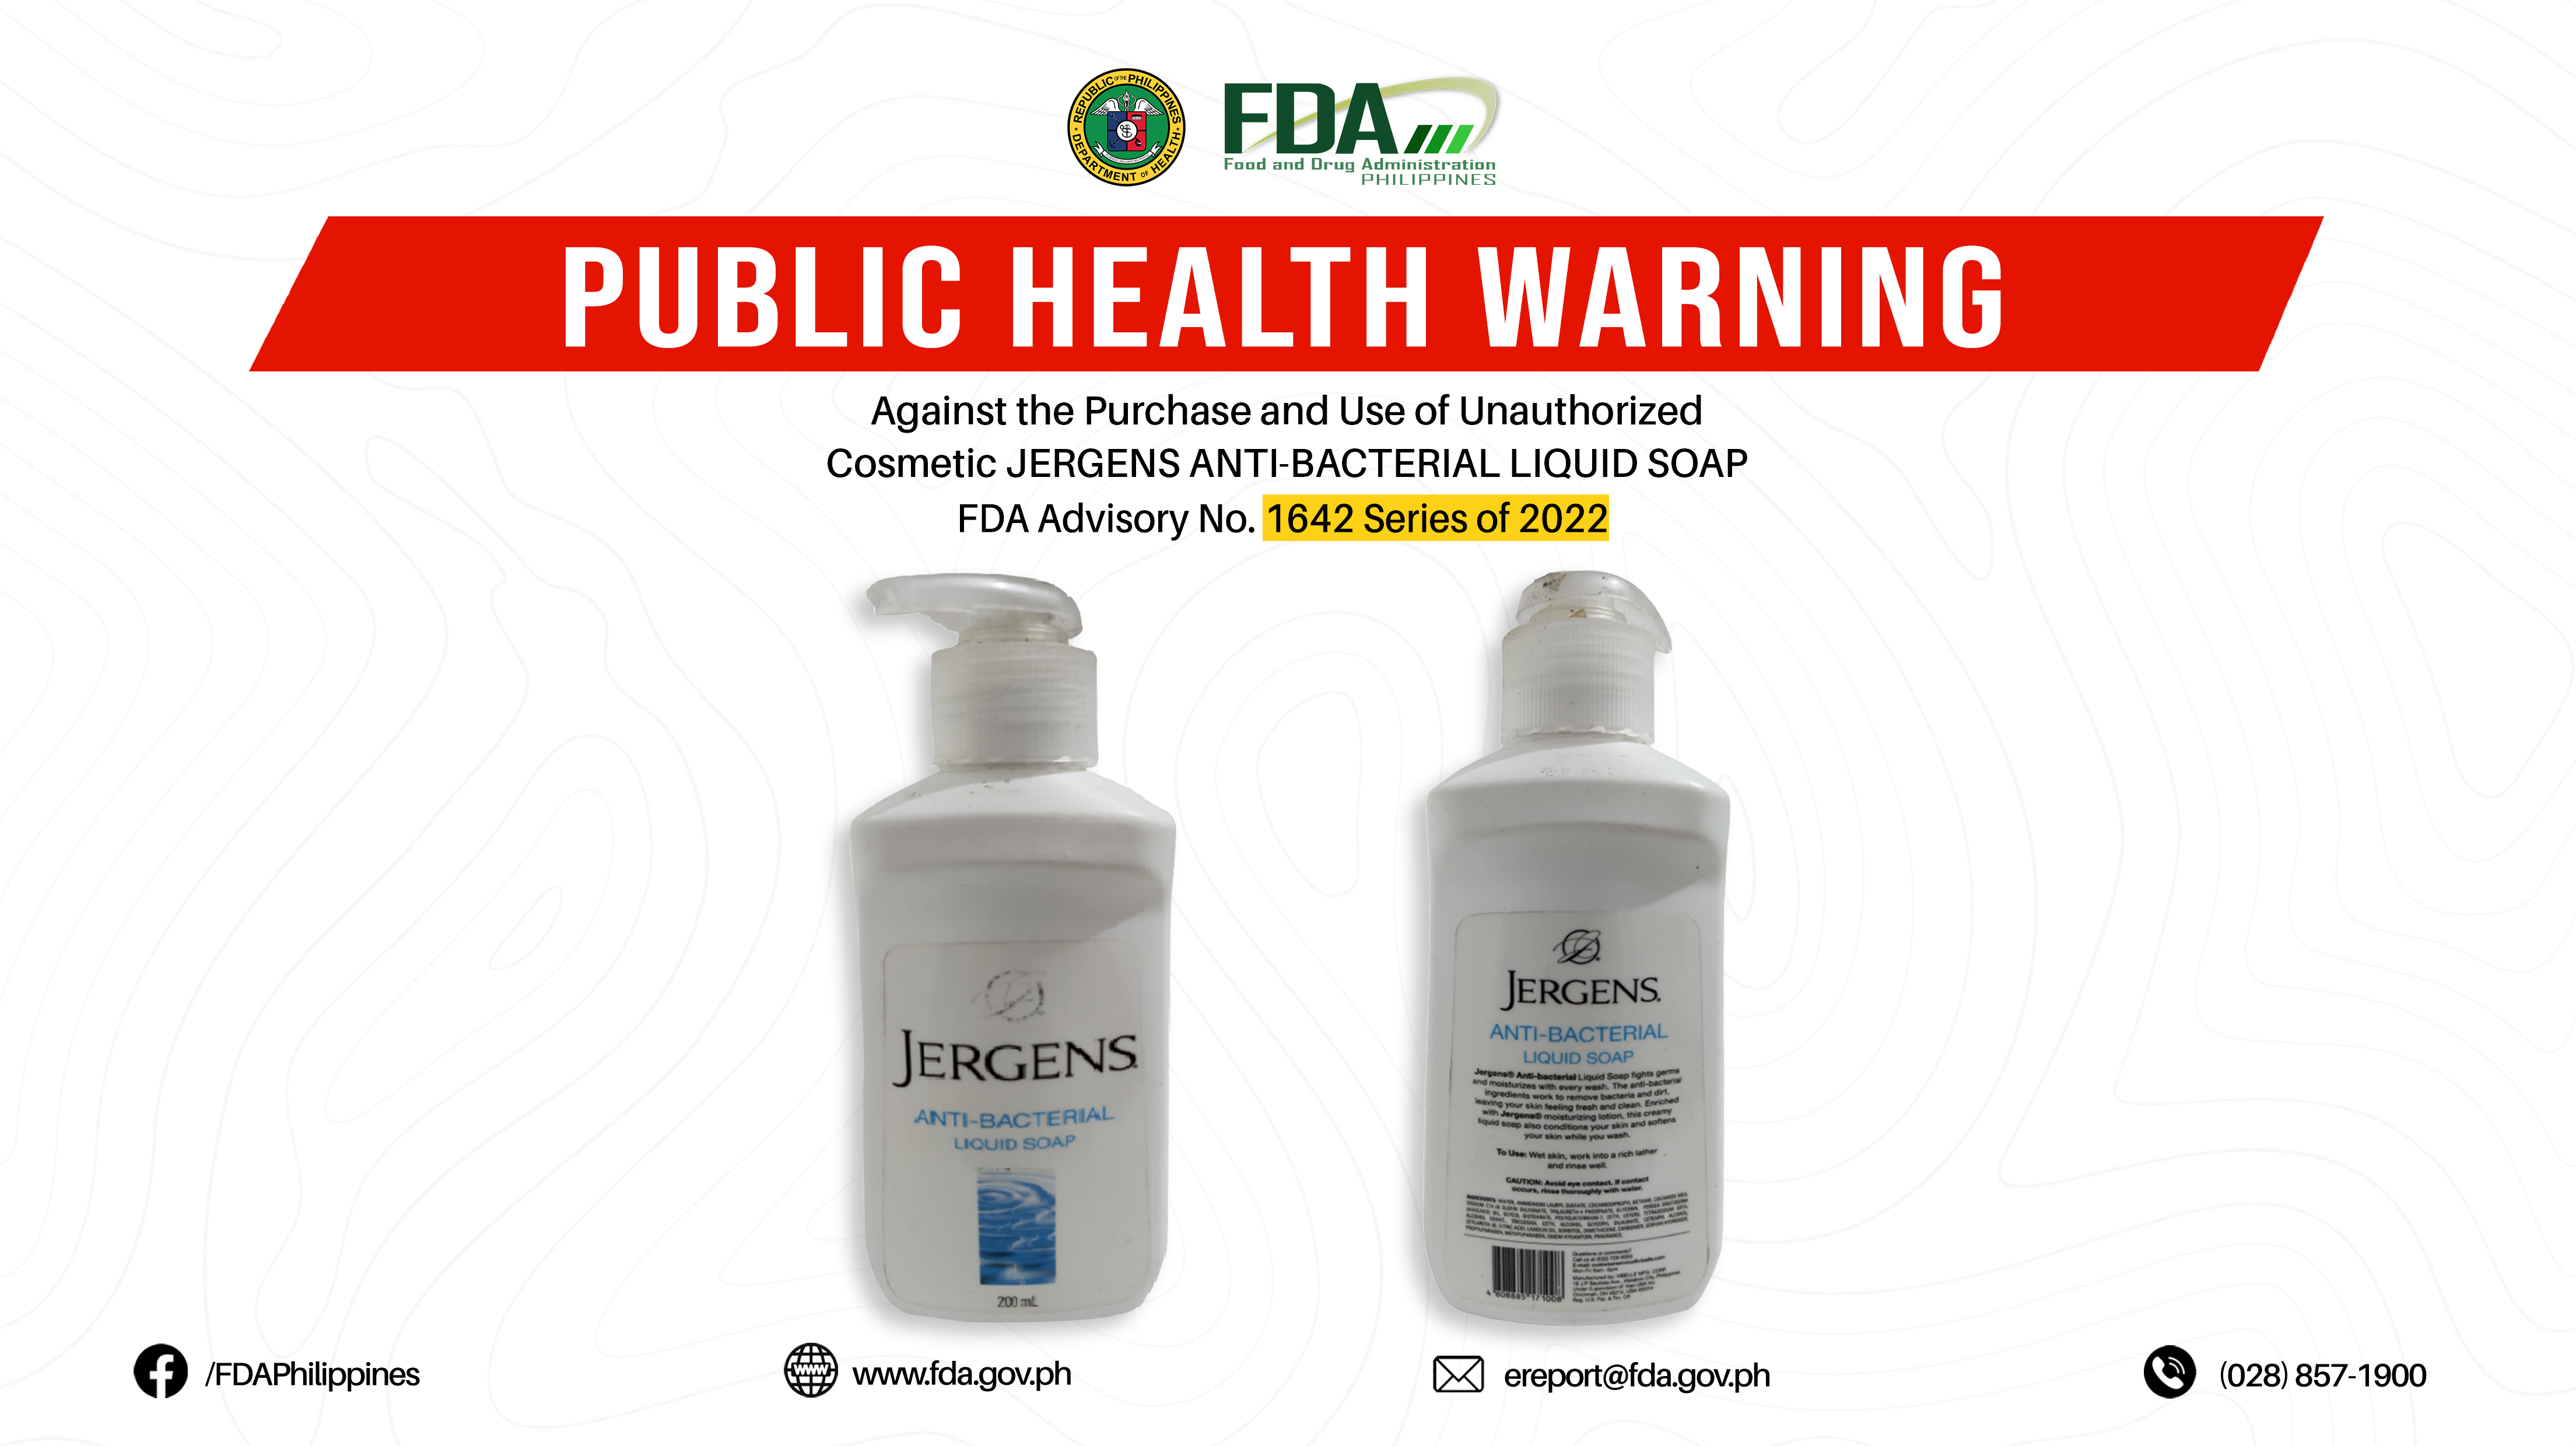 FDA Advisory No.2022-1642 || Public Health Warning Against the Purchase and Use of Unauthorized Cosmetic JERGENS ANTI-BACTERIAL LIQUID SOAP